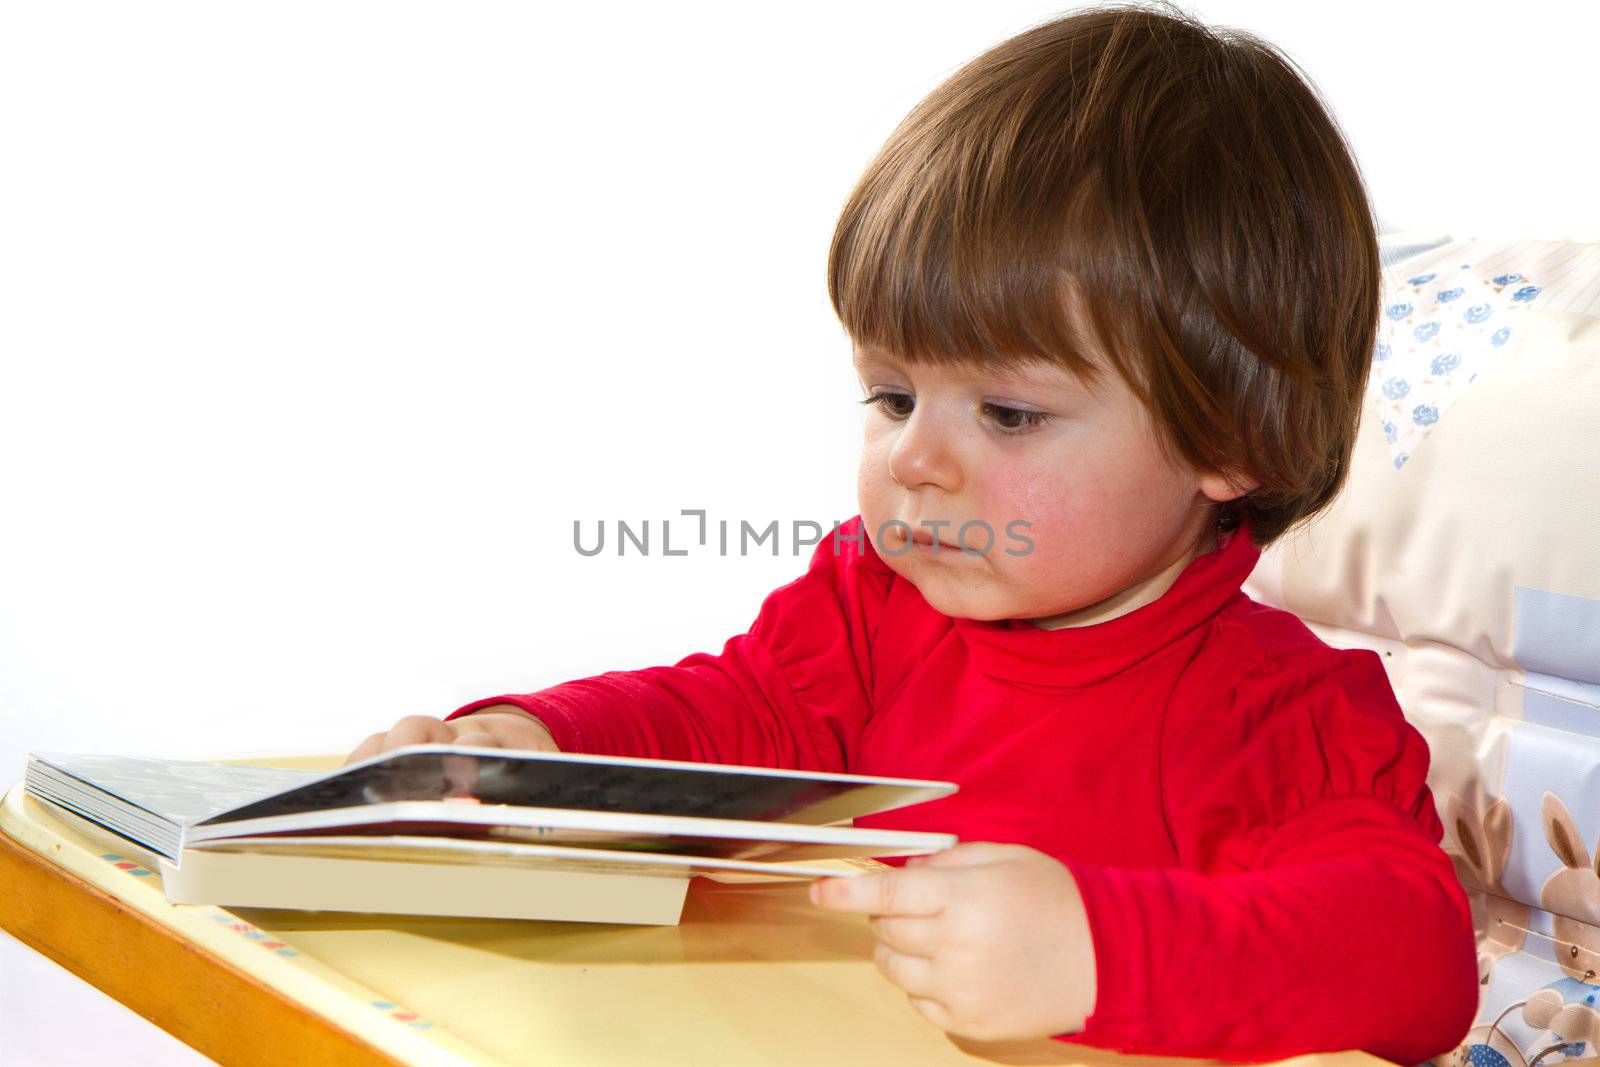 adorable one-year old baby reading a book